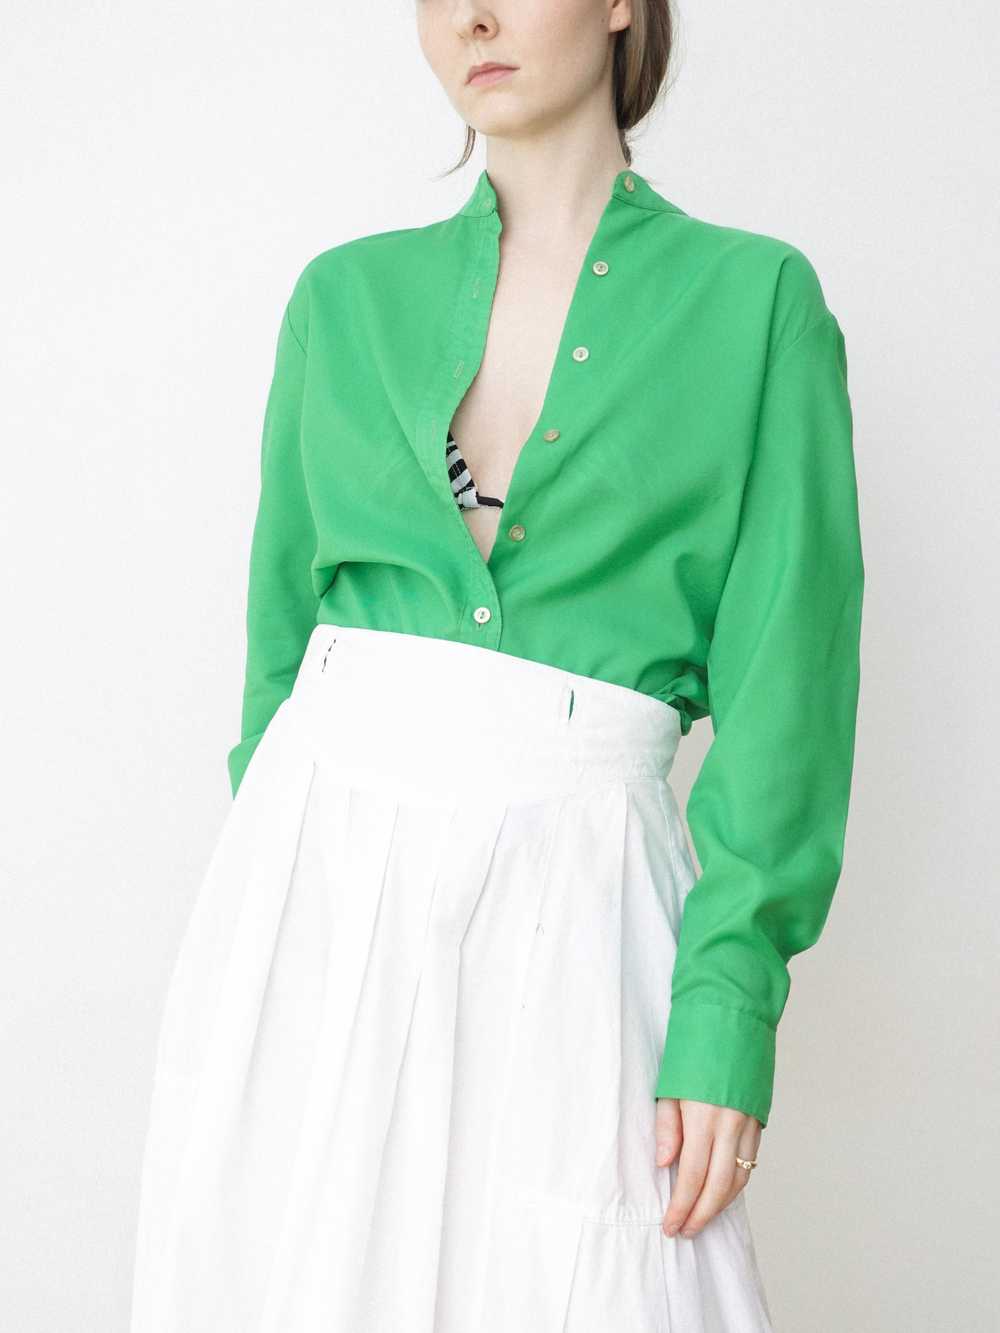 Kelly Green Band Collar Button Up Blouse - image 2